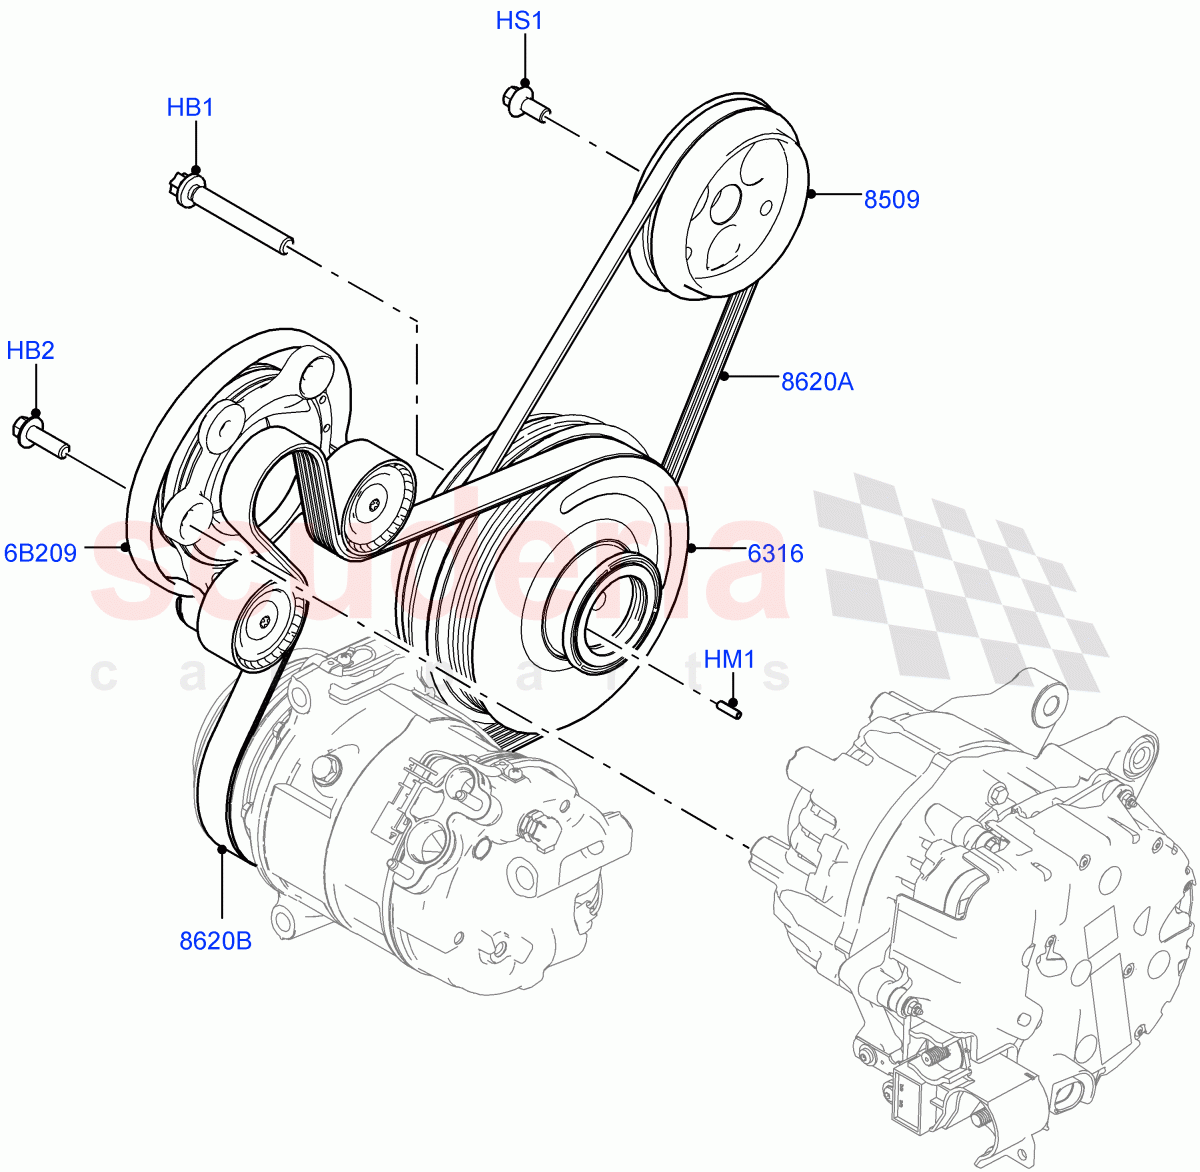 Pulleys And Drive Belts(2.0L AJ20P4 Petrol Mid PTA,Changsu (China),Electric Engine Battery-MHEV)((V)FROMKG006088) of Land Rover Land Rover Range Rover Evoque (2019+) [2.0 Turbo Petrol AJ200P]